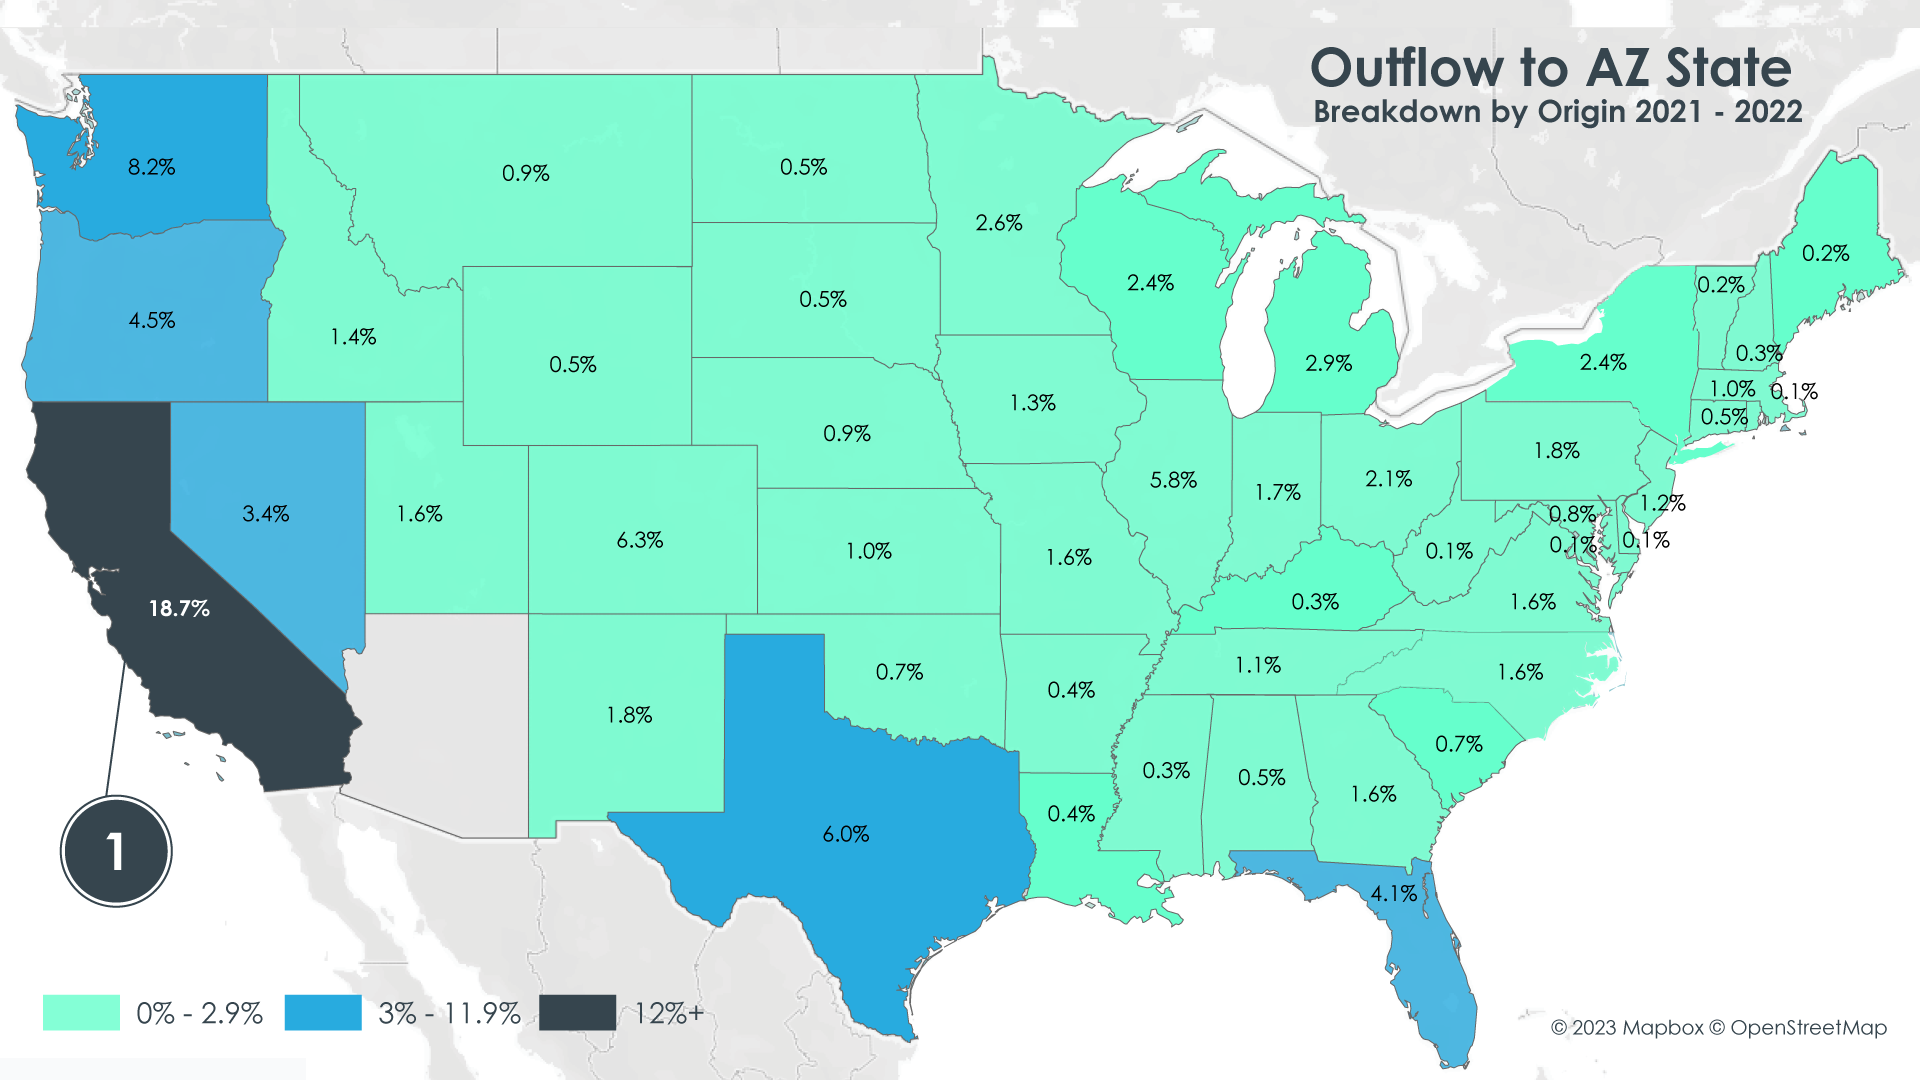 Population Data and outflow to Arizona